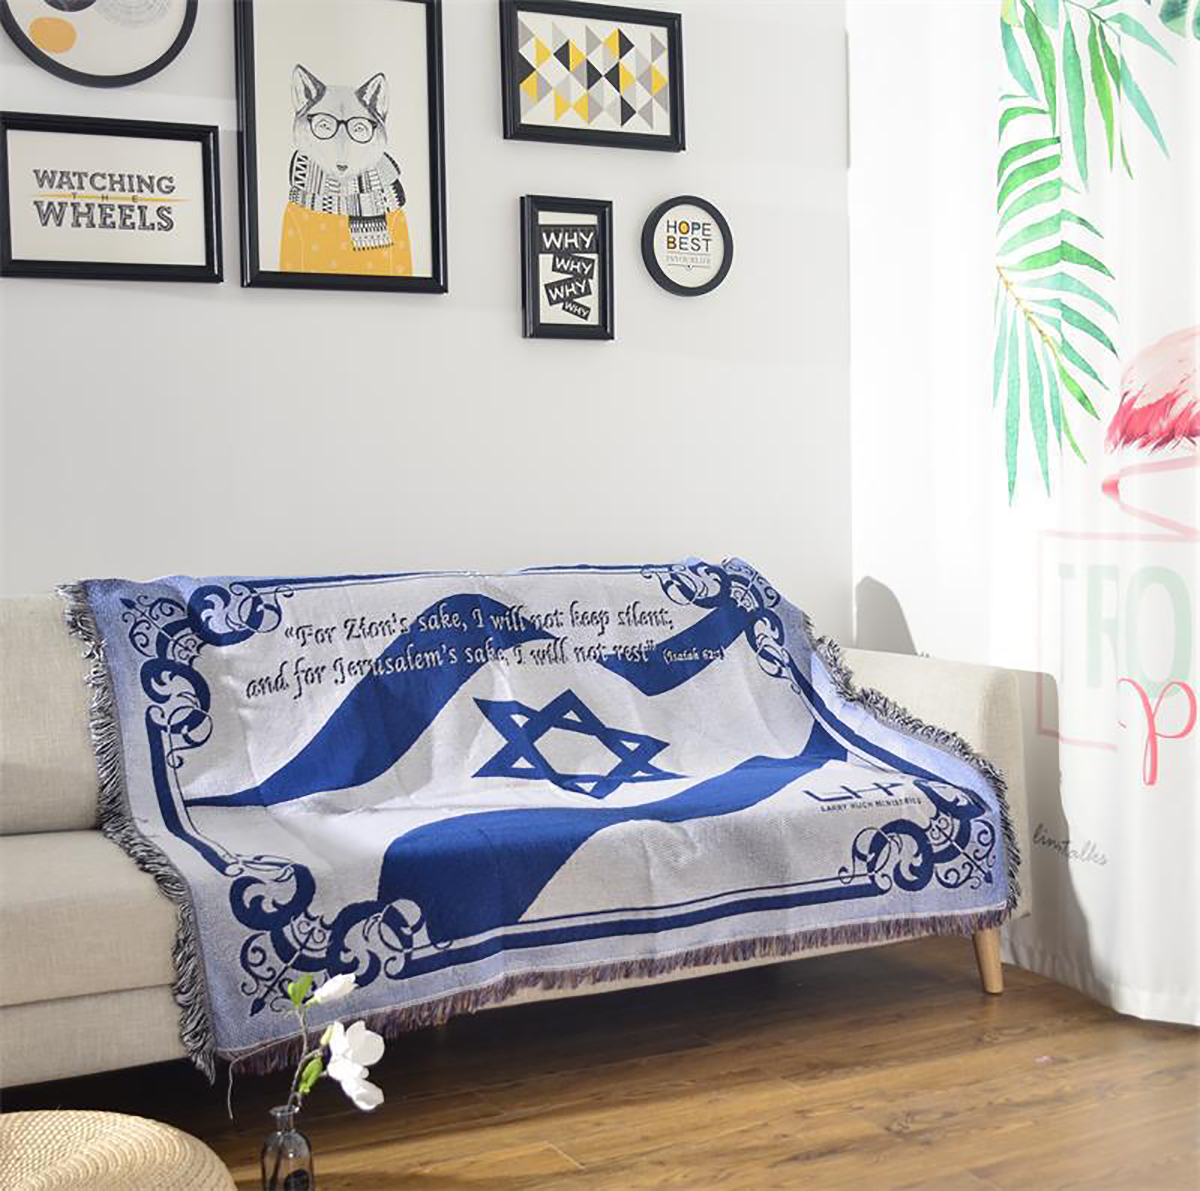 Folding-Decorative-Blanket-Knit-Tapestry-Prayer-Carpet-Middle-East-Sofa-Towel-for-Home-Textiles-1761320-6